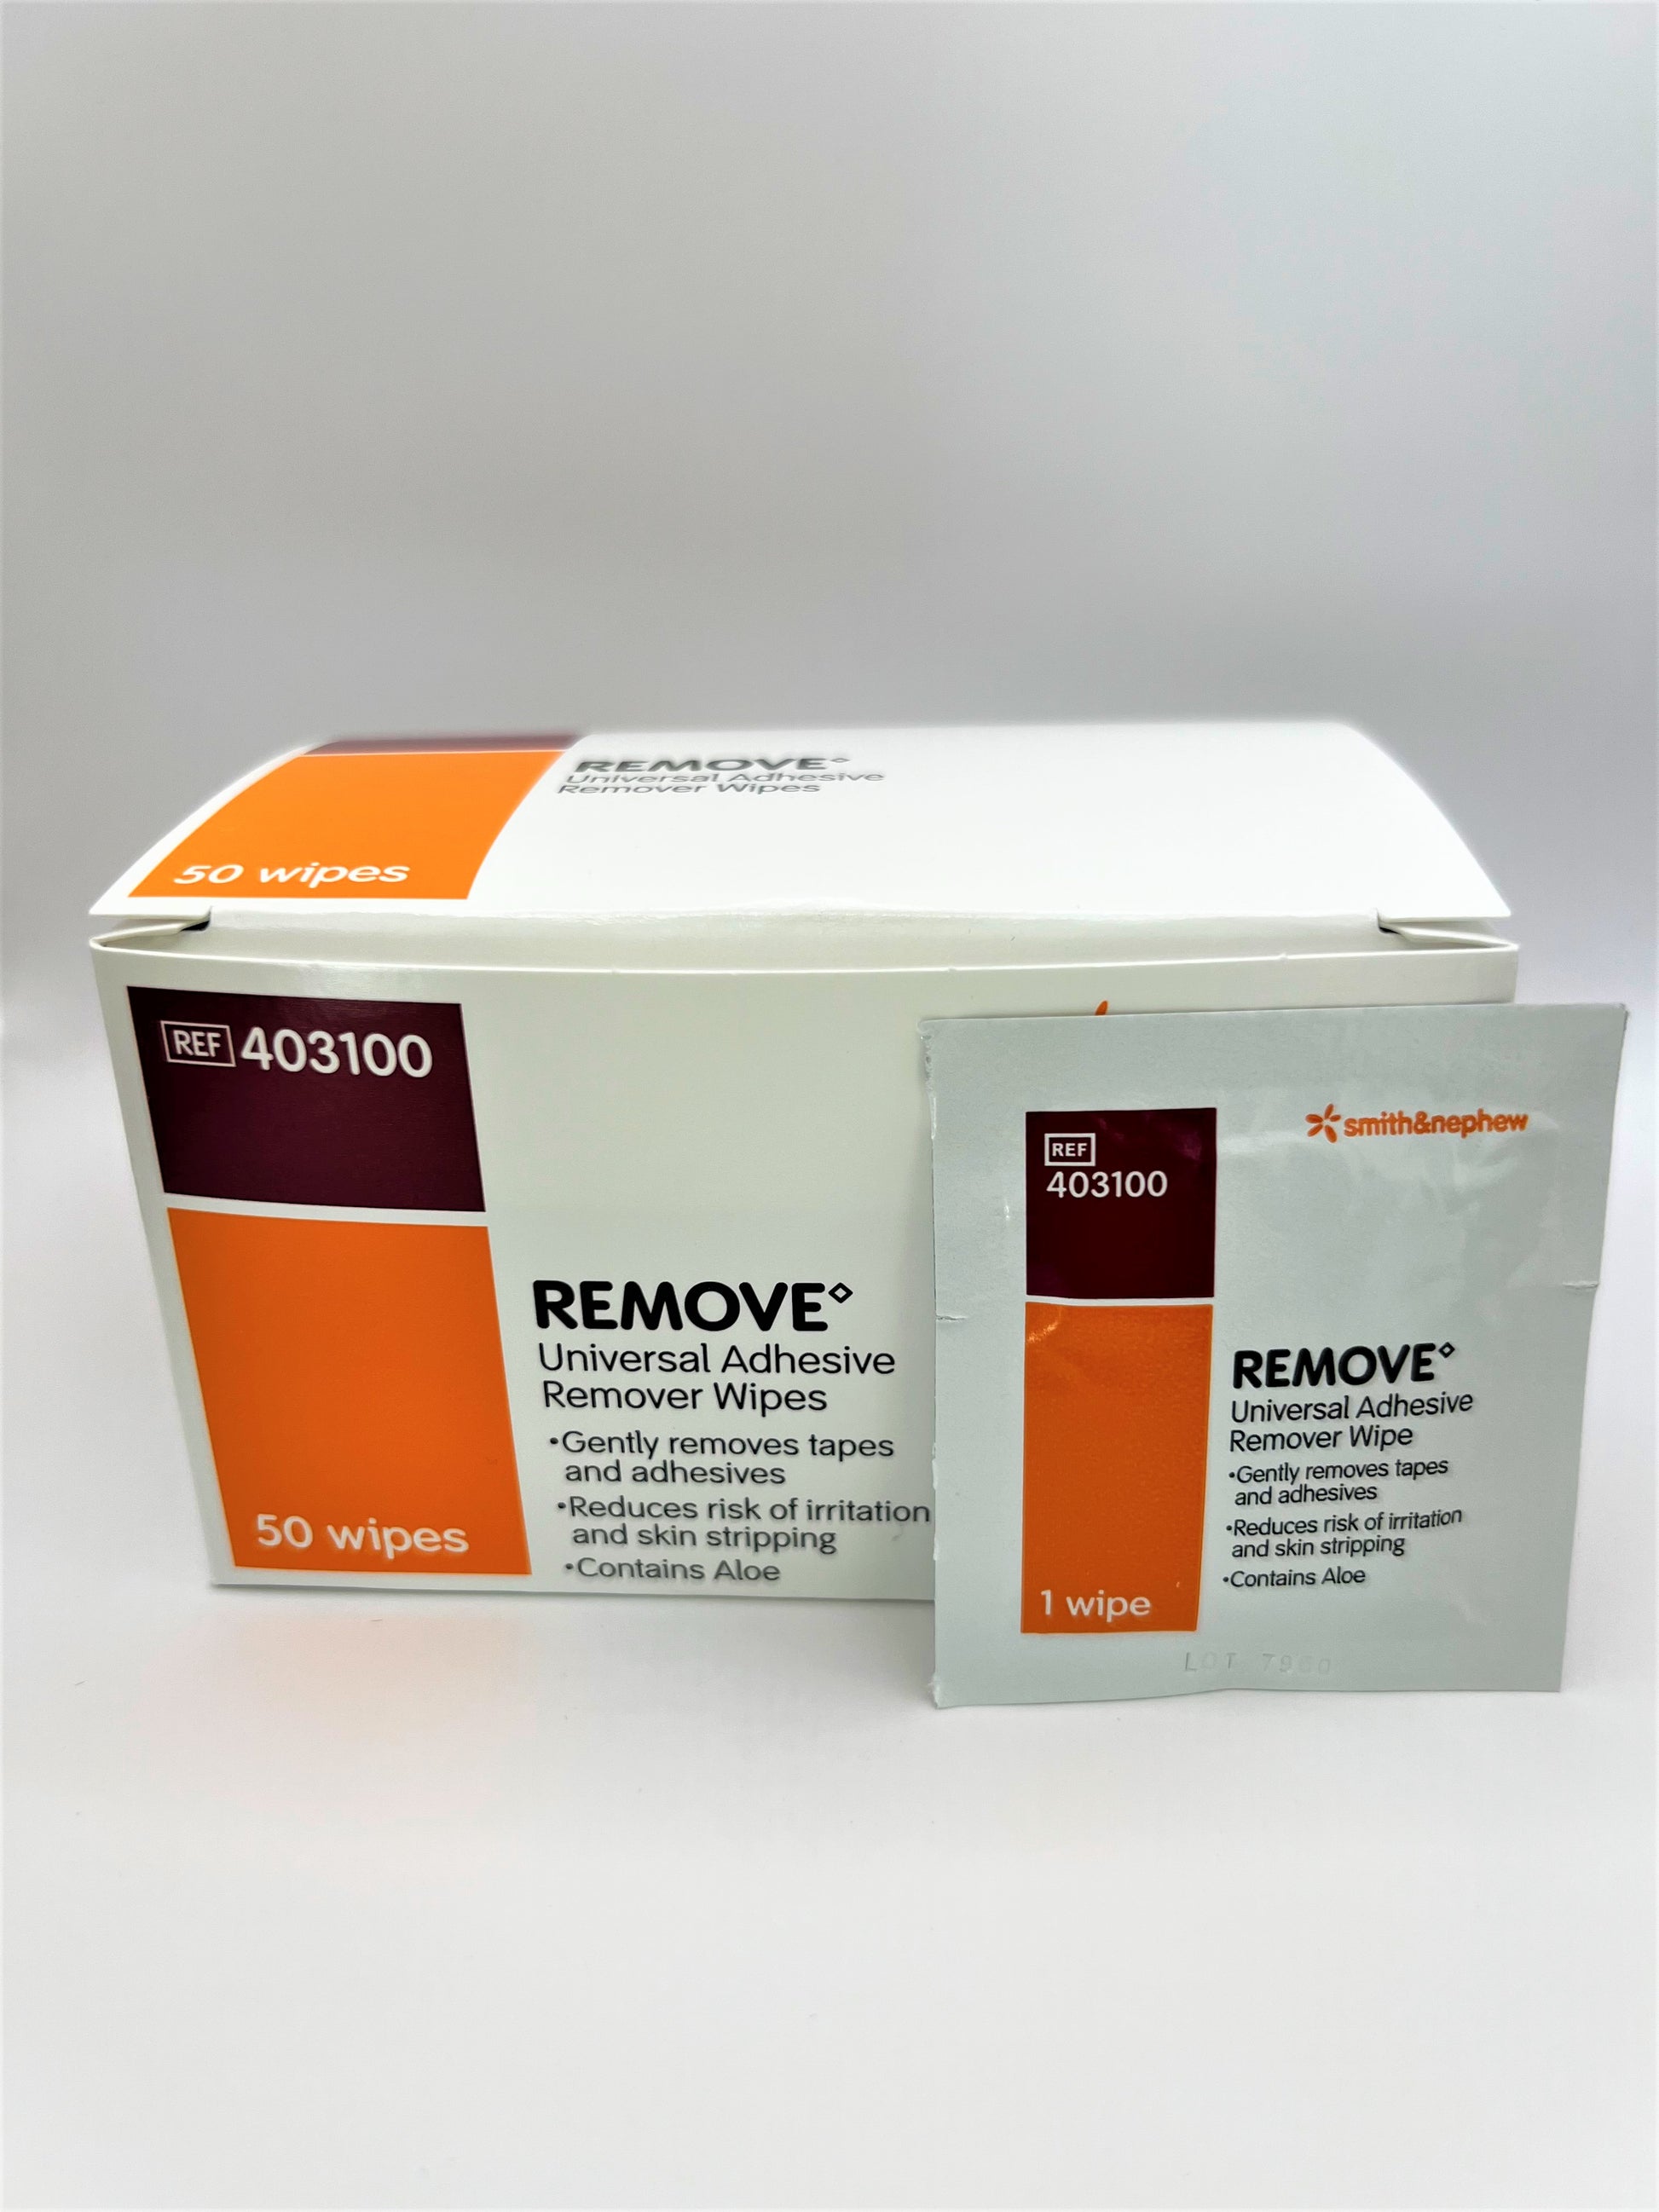 ConvaTec ESENTA Adhesive Remover Wipes for Around Stomas and Wounds, Sting